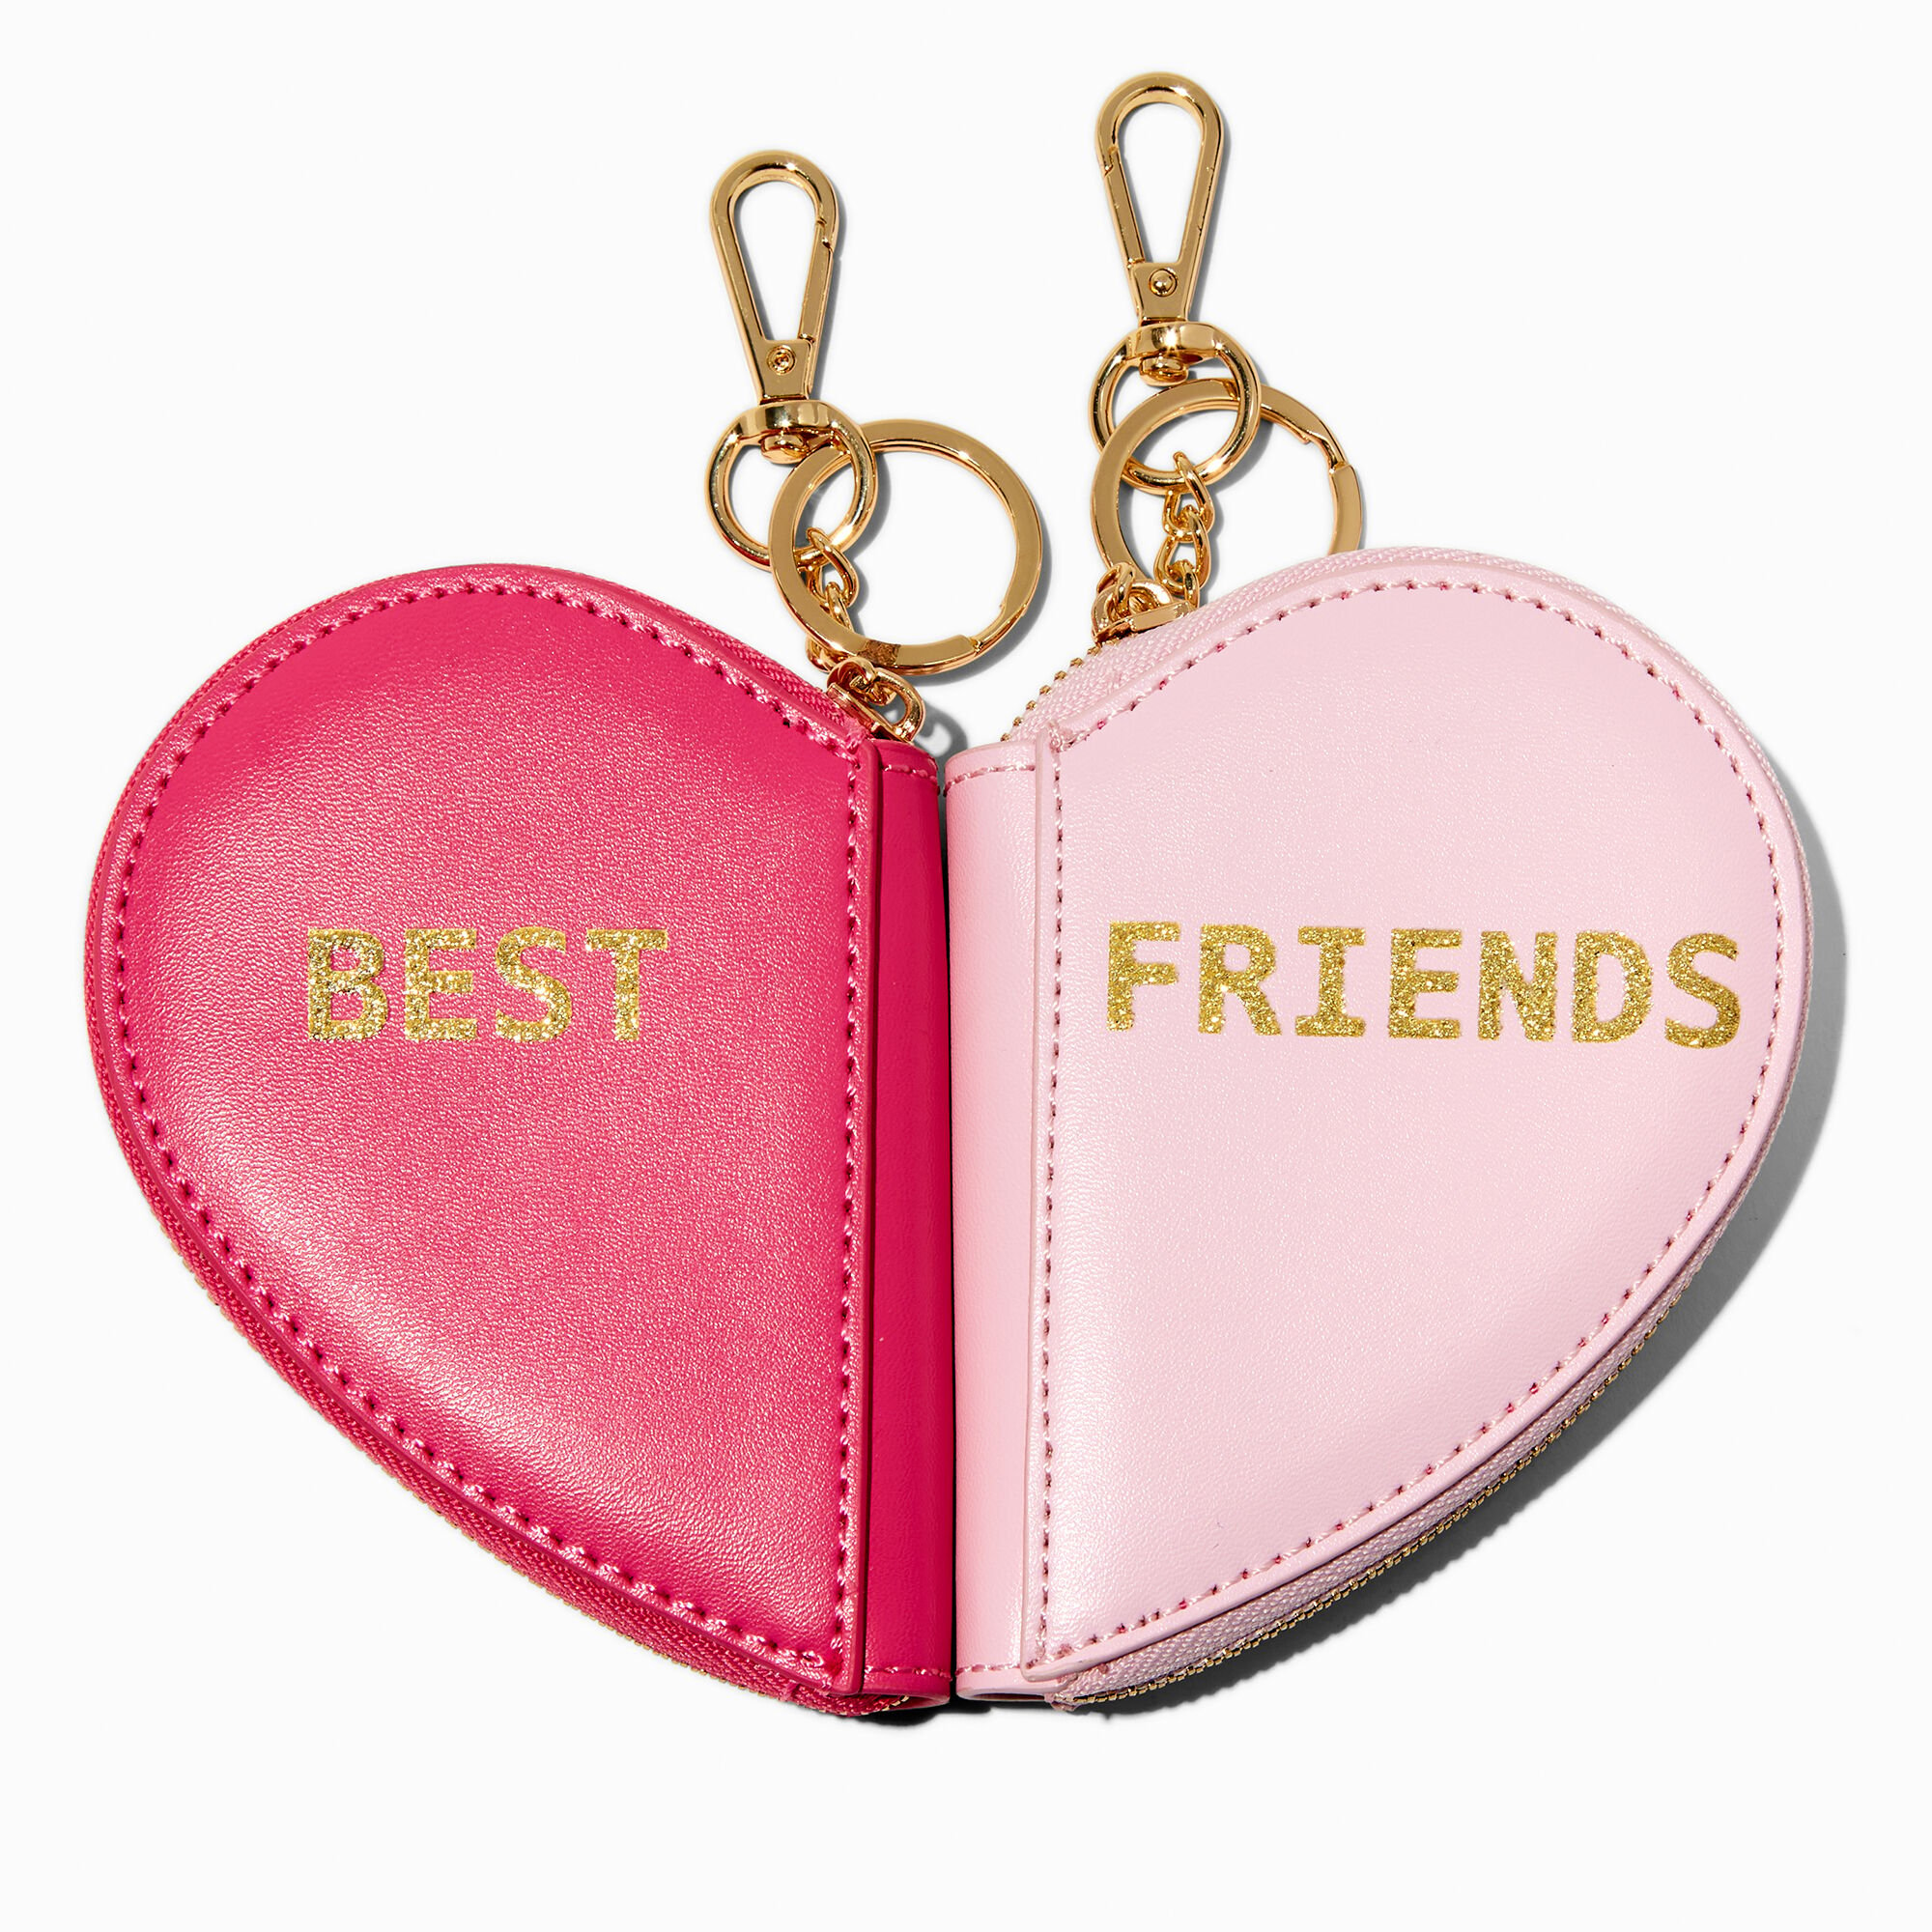 View Claires Best Friends Heart Coin Purse 2 Pack information